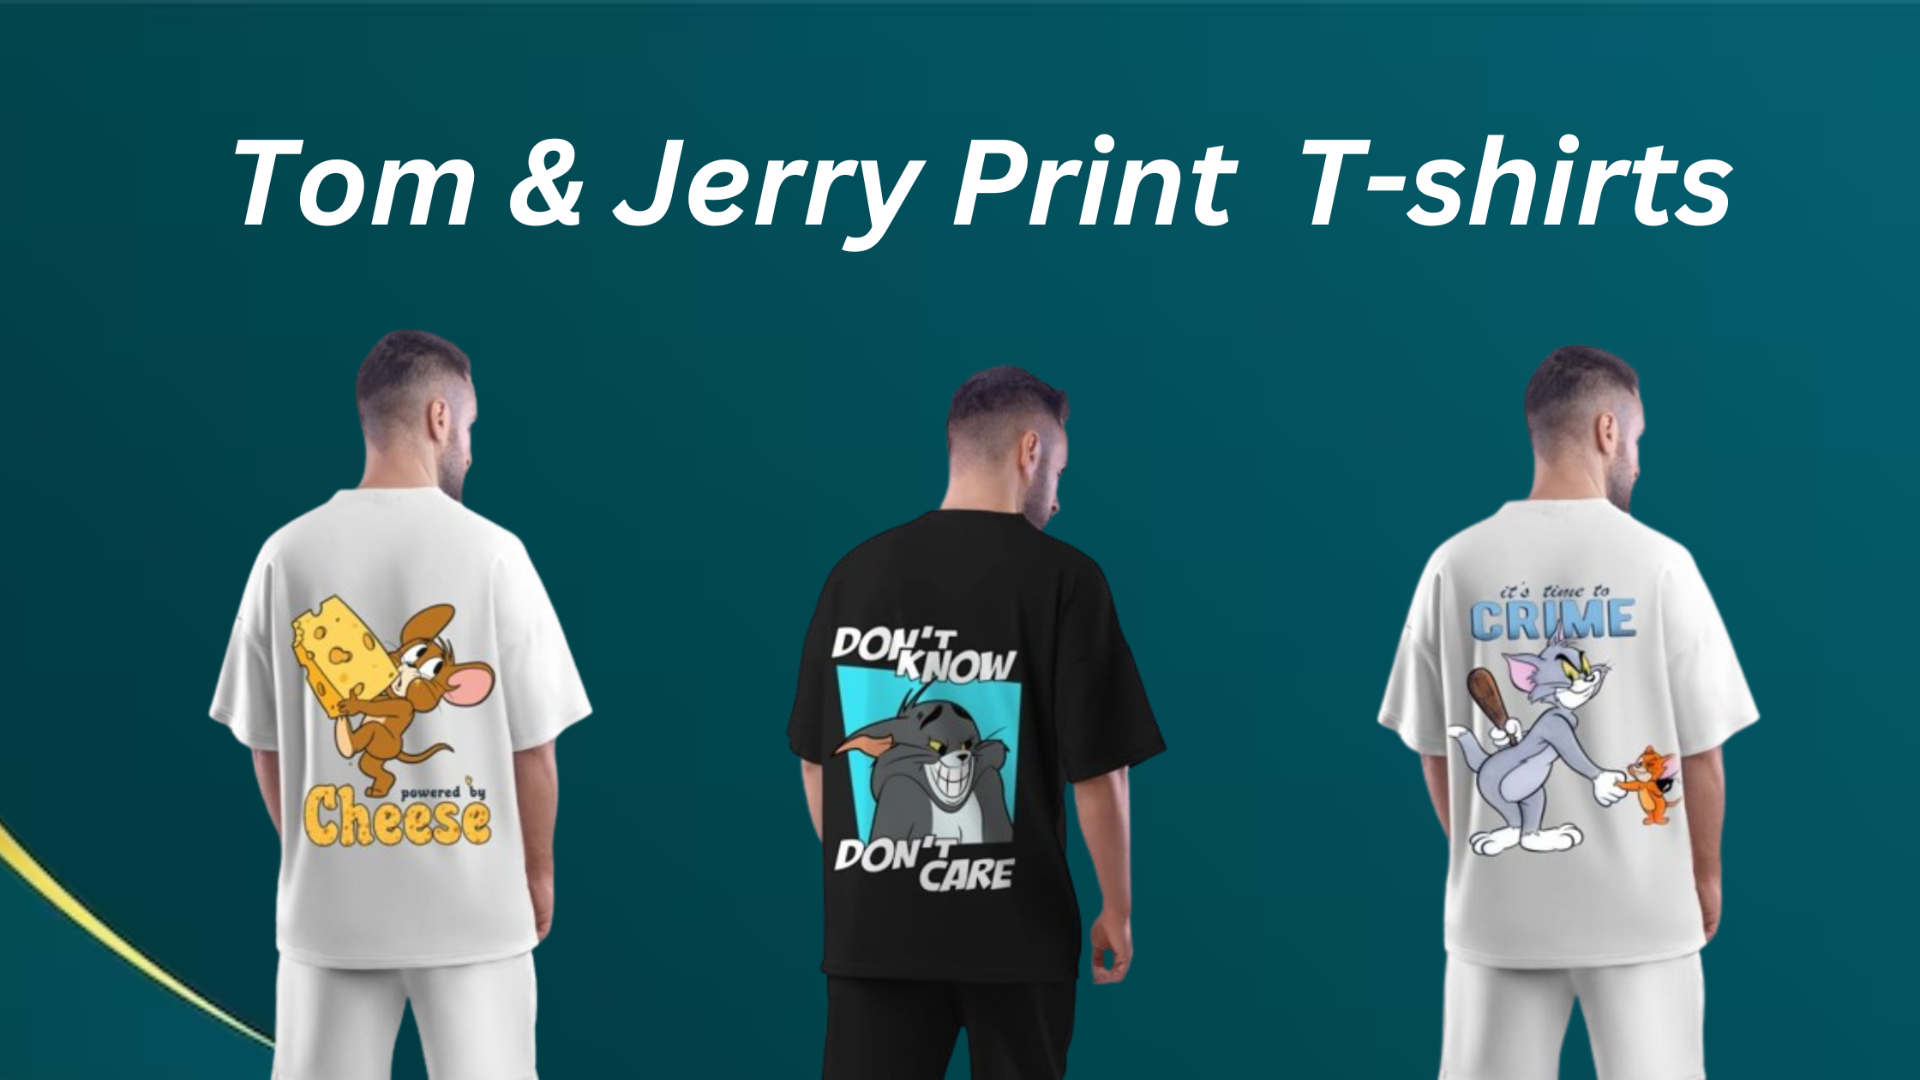 Tom and Jerry Print T-shirt